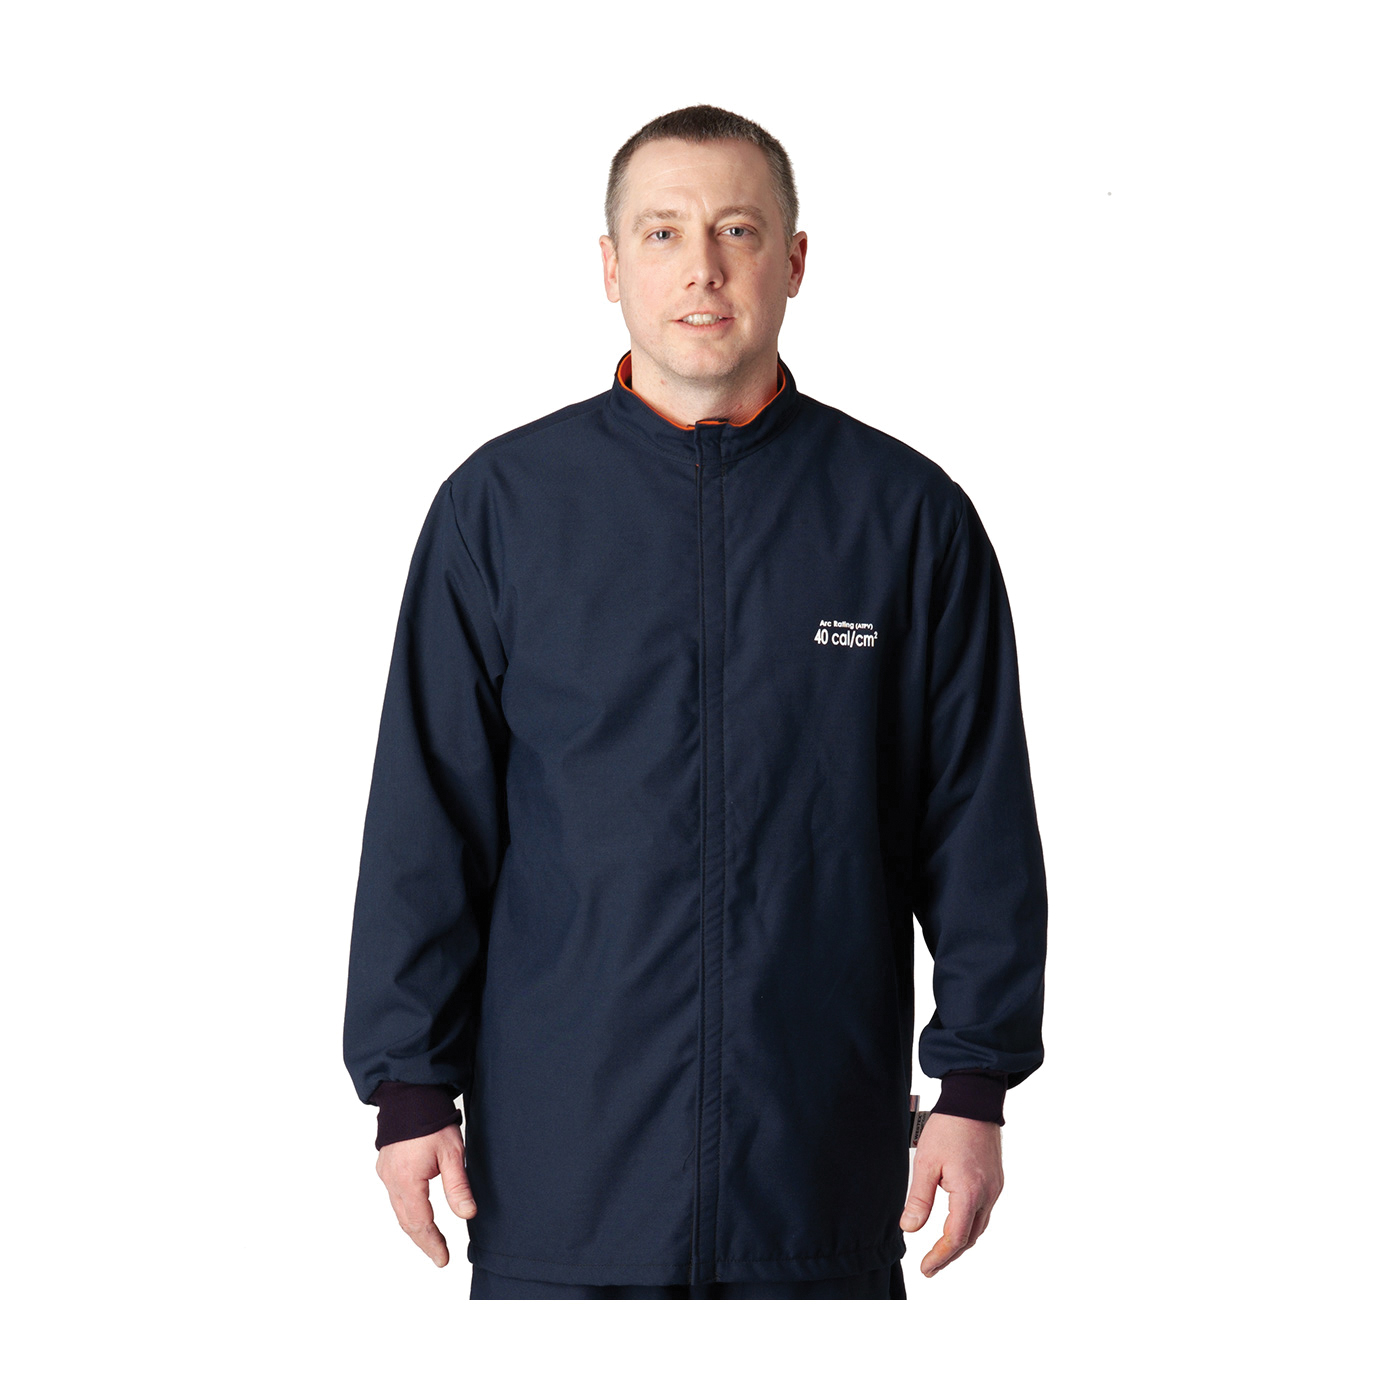 PIP® 9100-524ULT/S Ultra Light Arc and Flame Resistant Jacket, S, Navy Blue, DuPont™ Protera®/Westex® Ultrasoft, 36 to 38 in Chest, Resists: Arc and Flame, ASTM F1506-10a, ASTM F2178-12